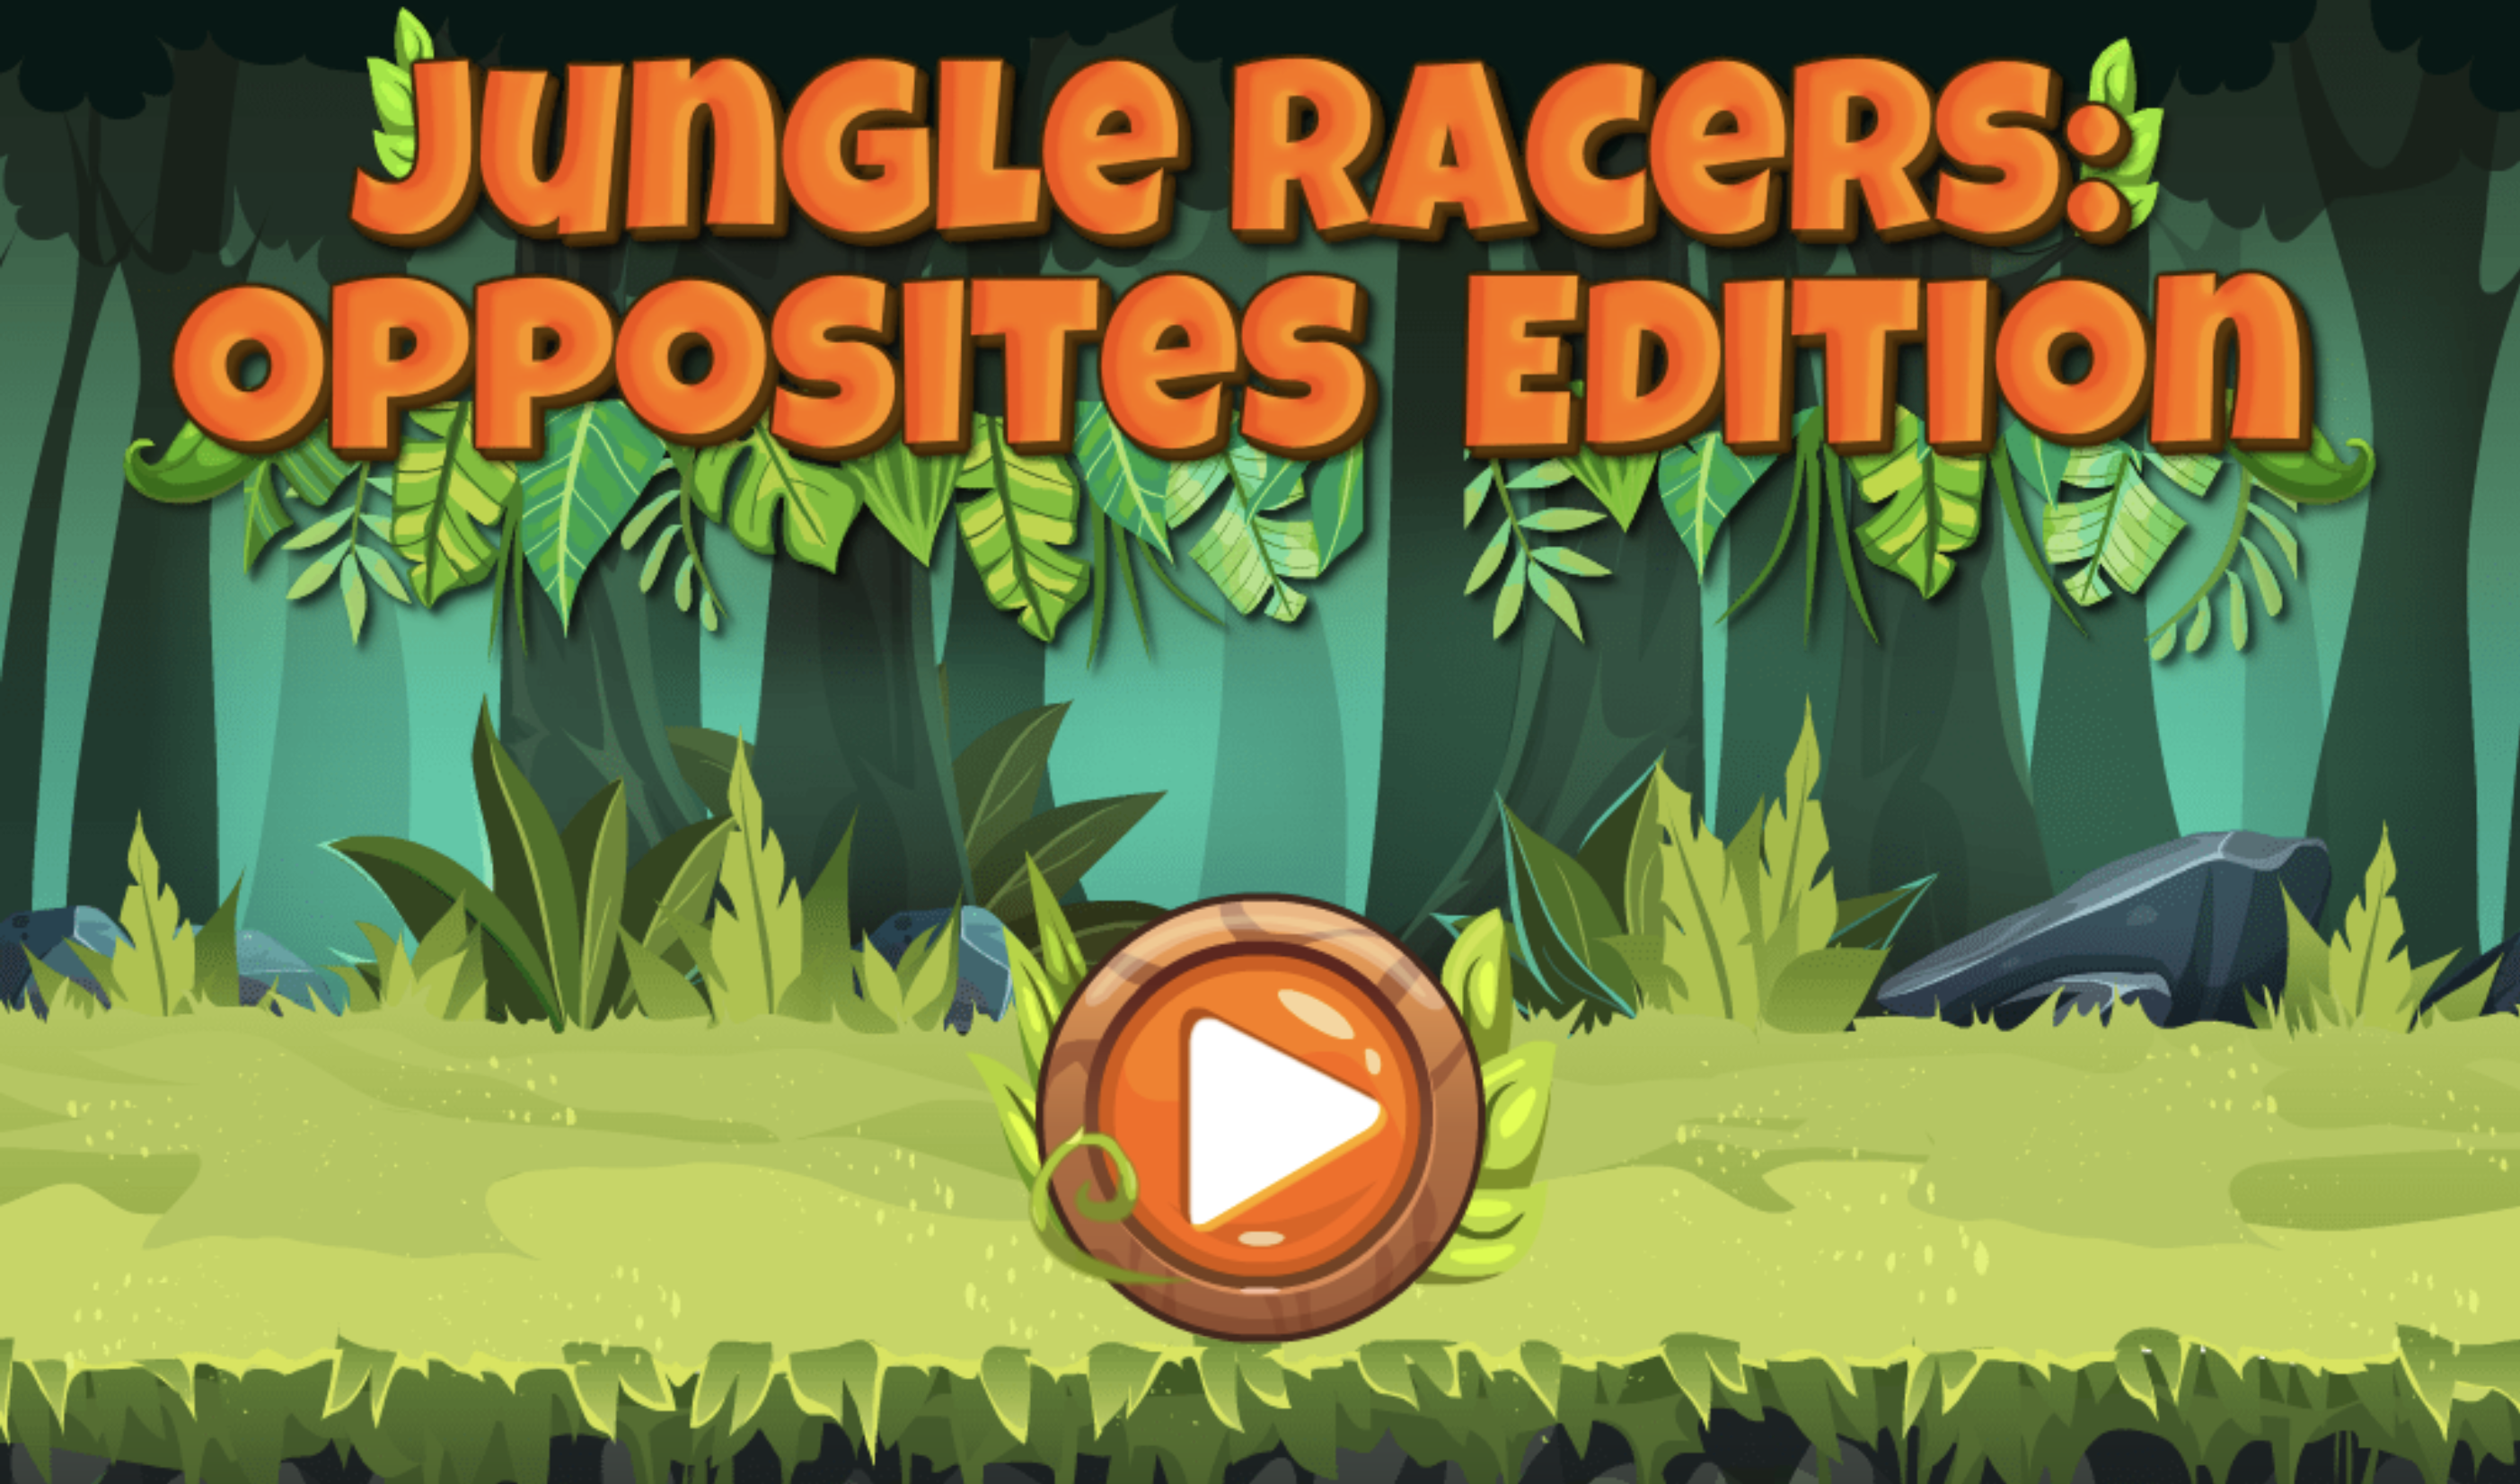 Jungle Racers Opposites Edition